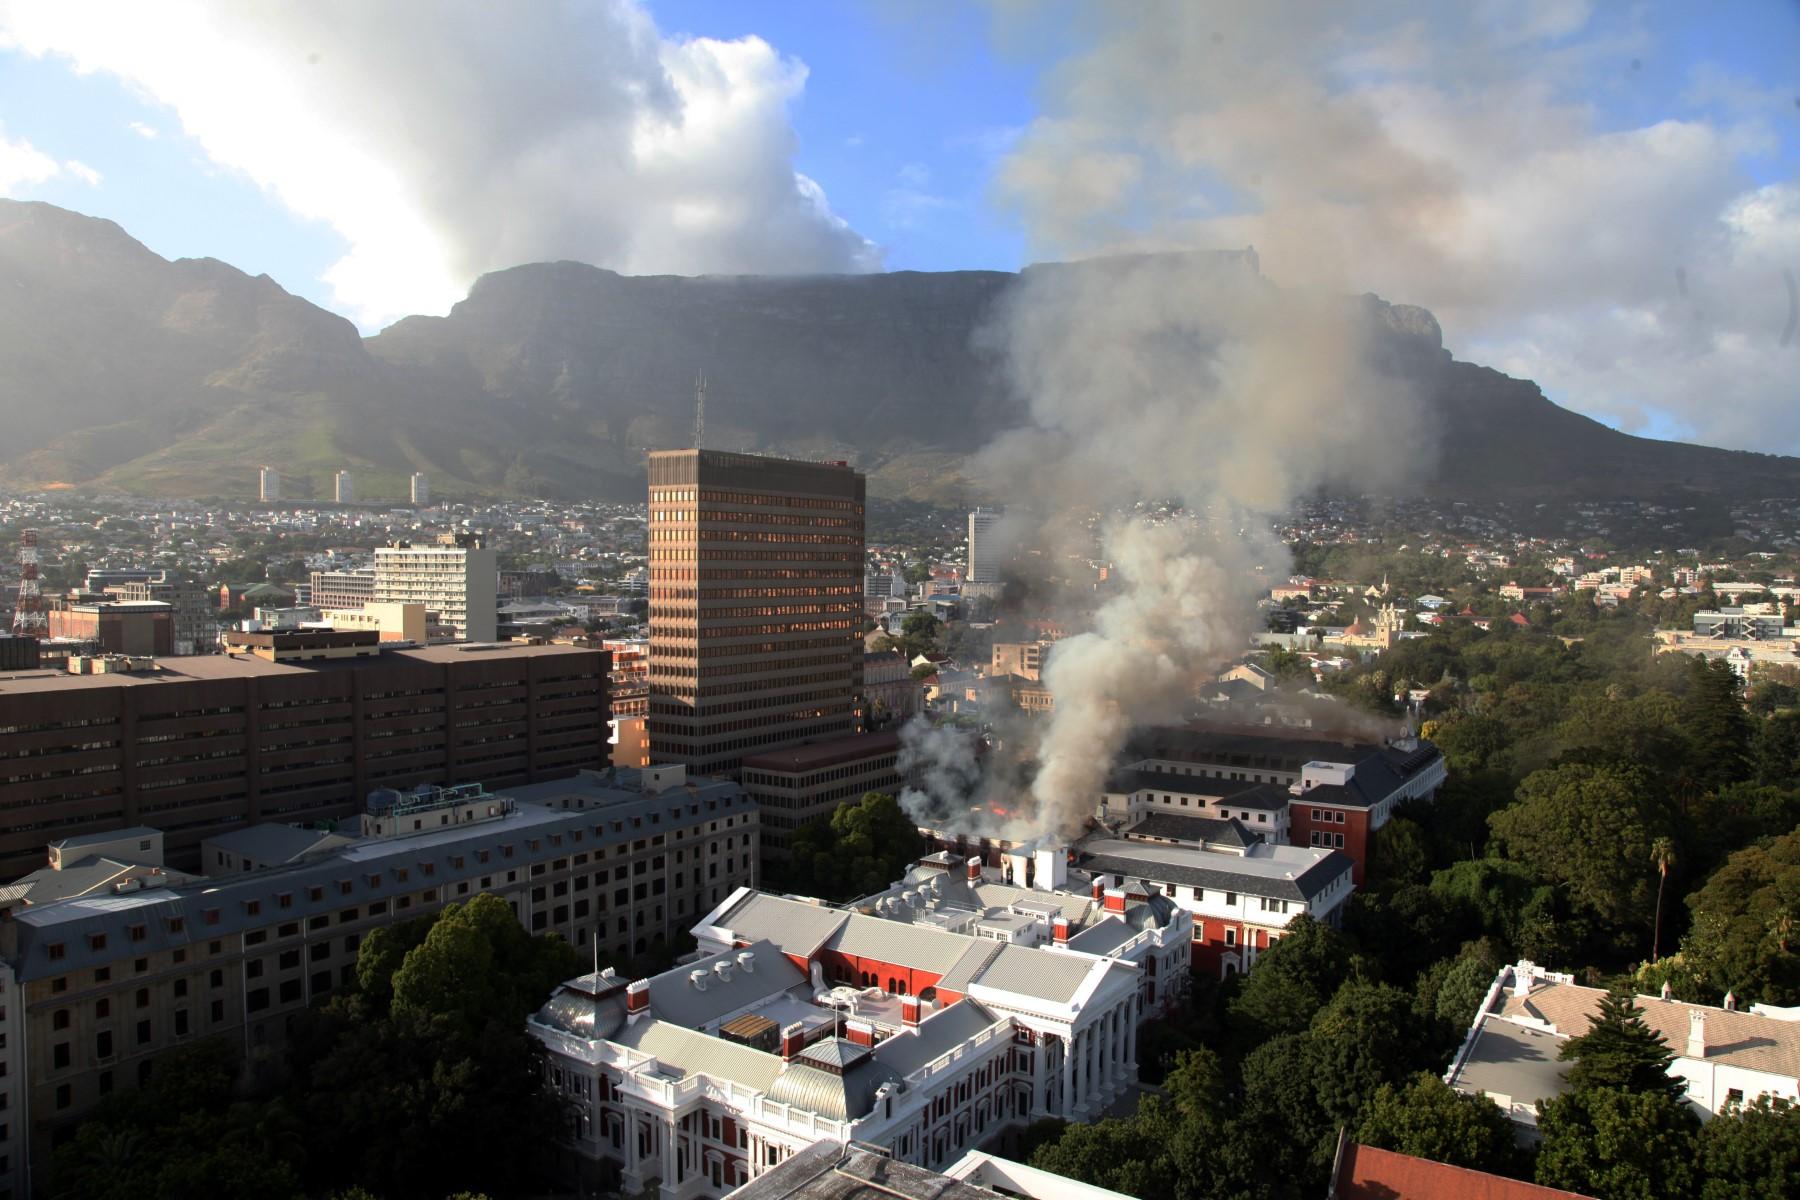 A general view of a building on fire at the South African parliament precinct in Cape Town on Jan 2. Photo: AFP